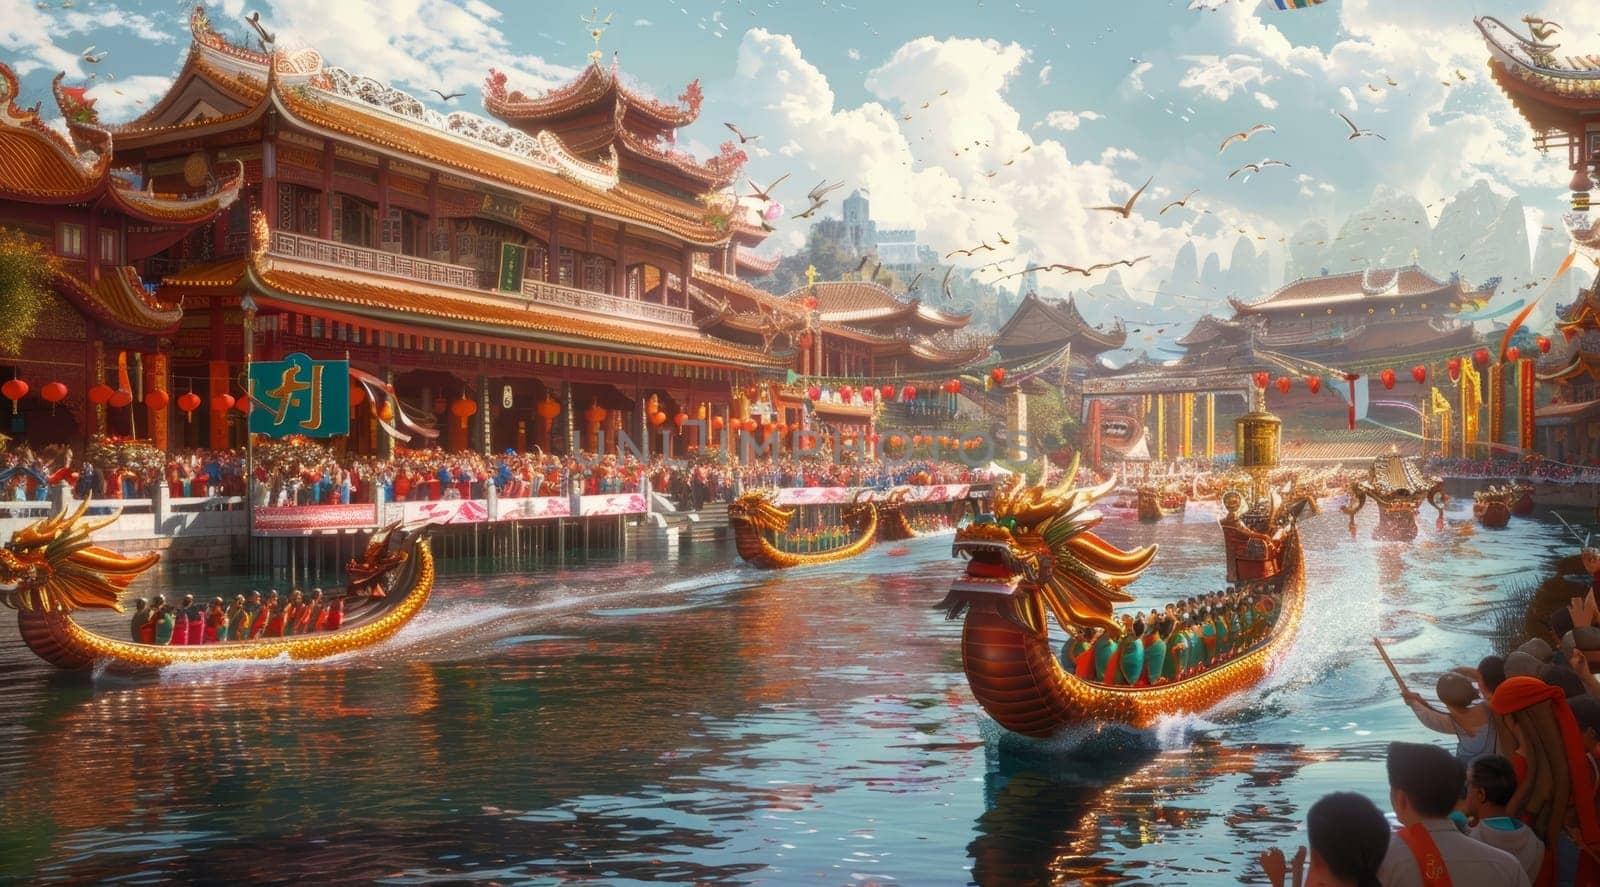 A bustling Dragon Boat Festival with ornate dragon boats racing on a river, flanked by historic architecture and cheering crowds. by sfinks